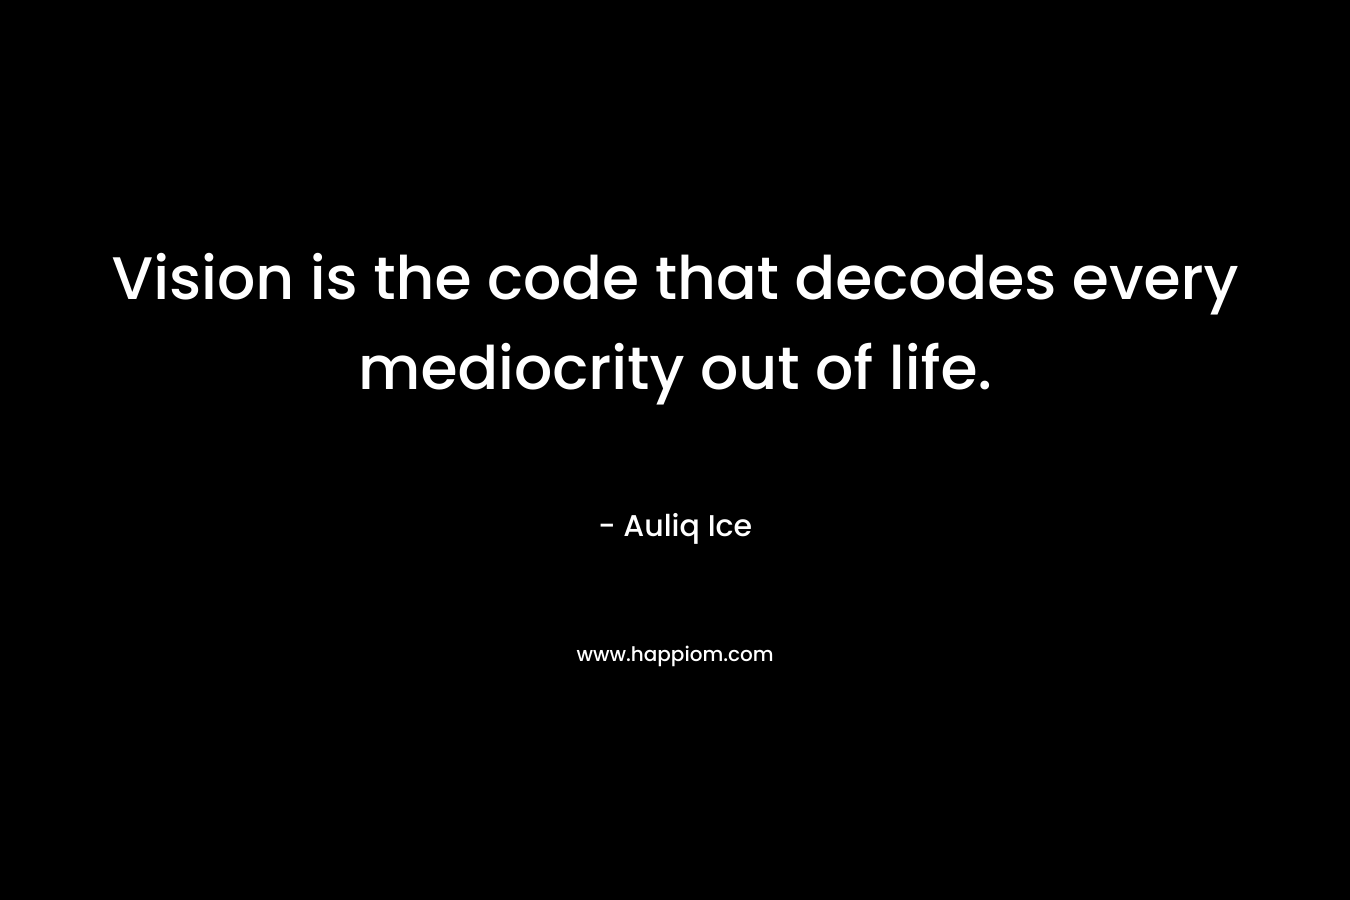 Vision is the code that decodes every mediocrity out of life.